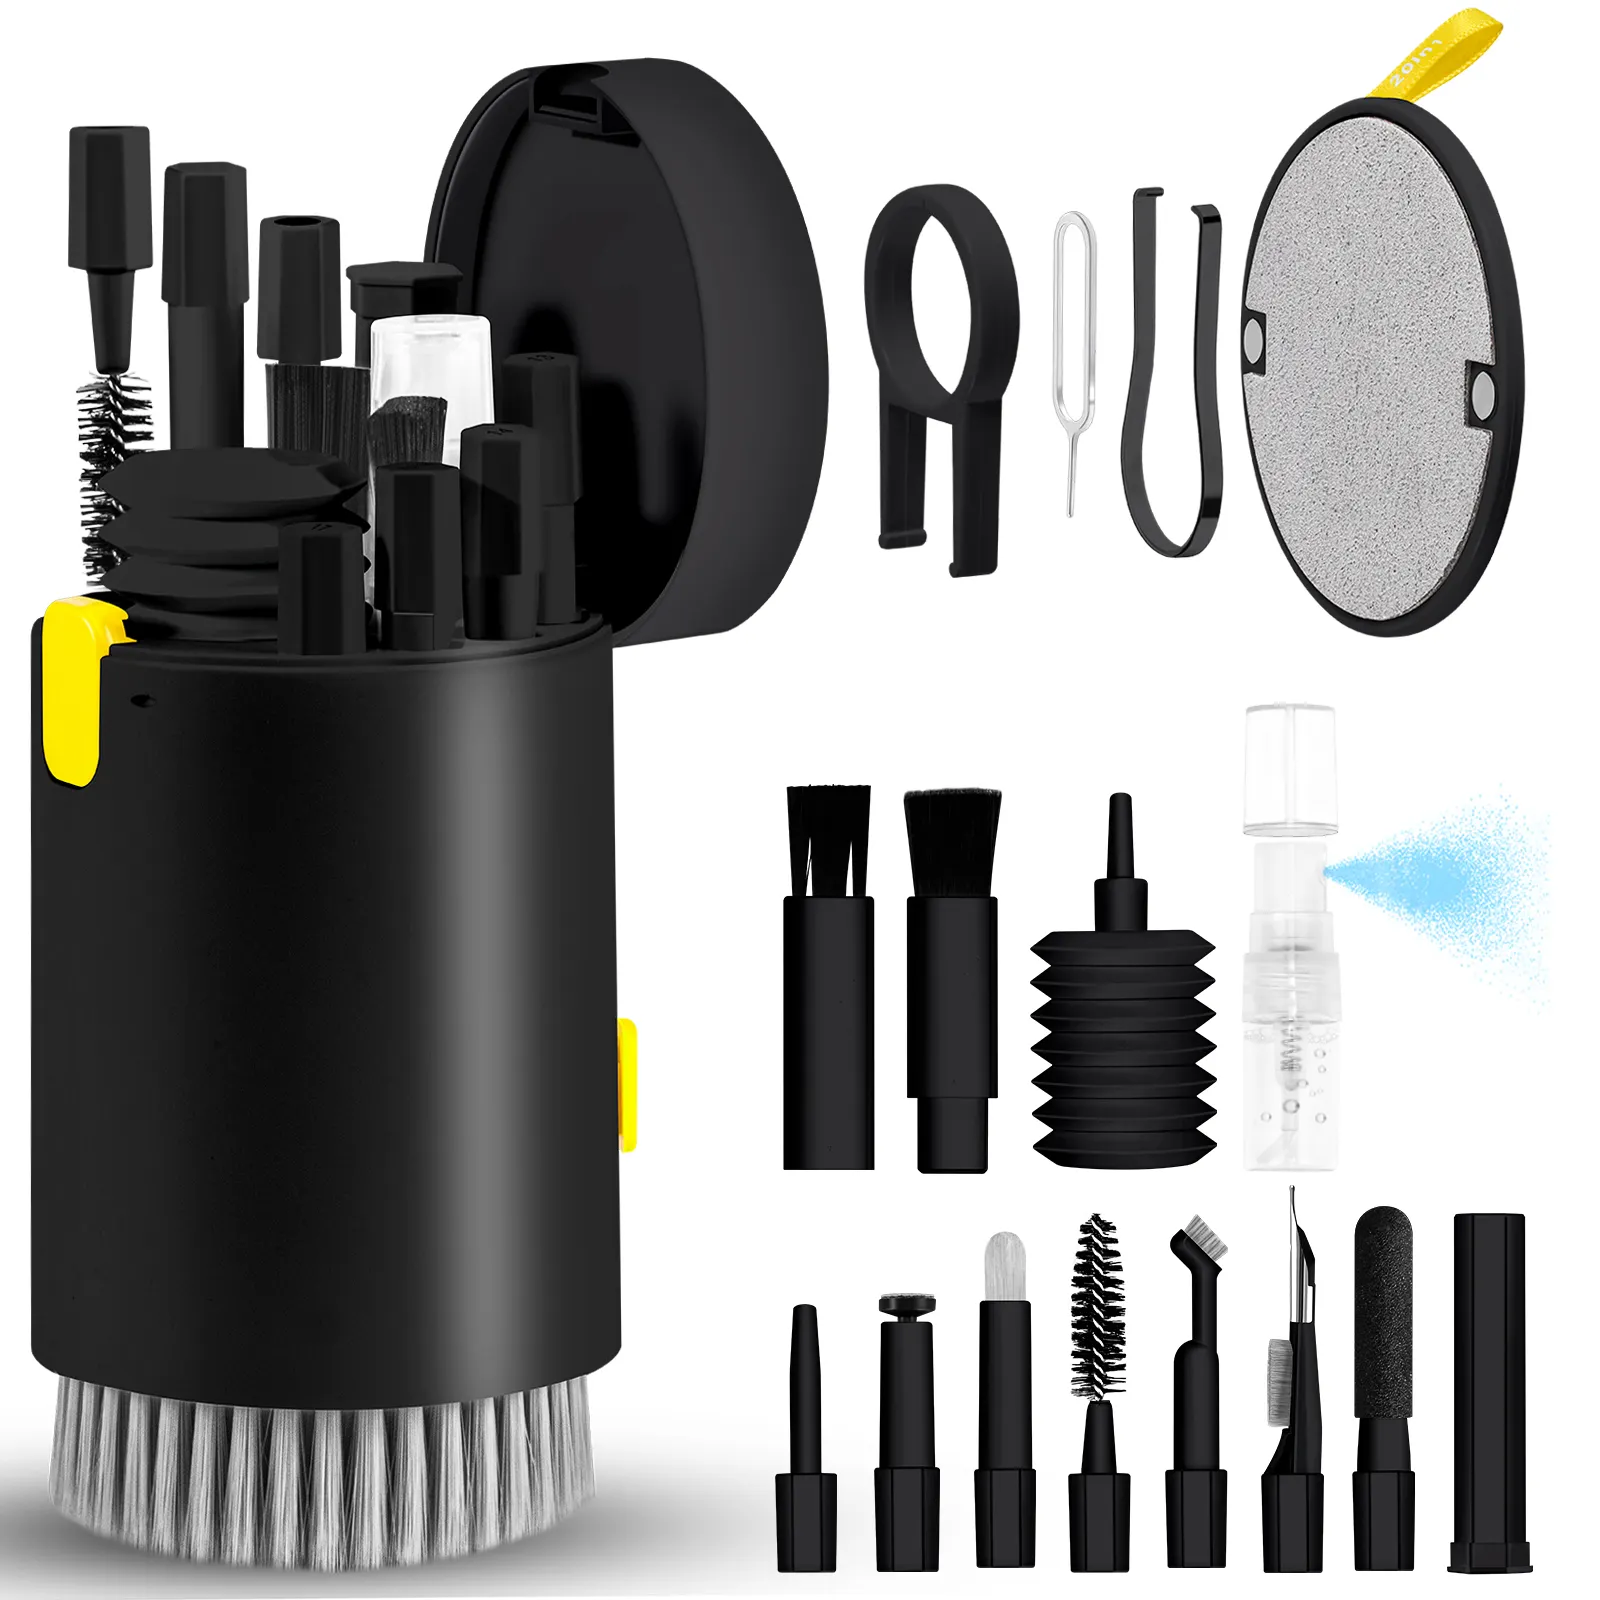 Portable Camera Lens Cleaning Kit 20 in 1 Multifunctional Phone Keyboard Device Cleaning Brush Kit